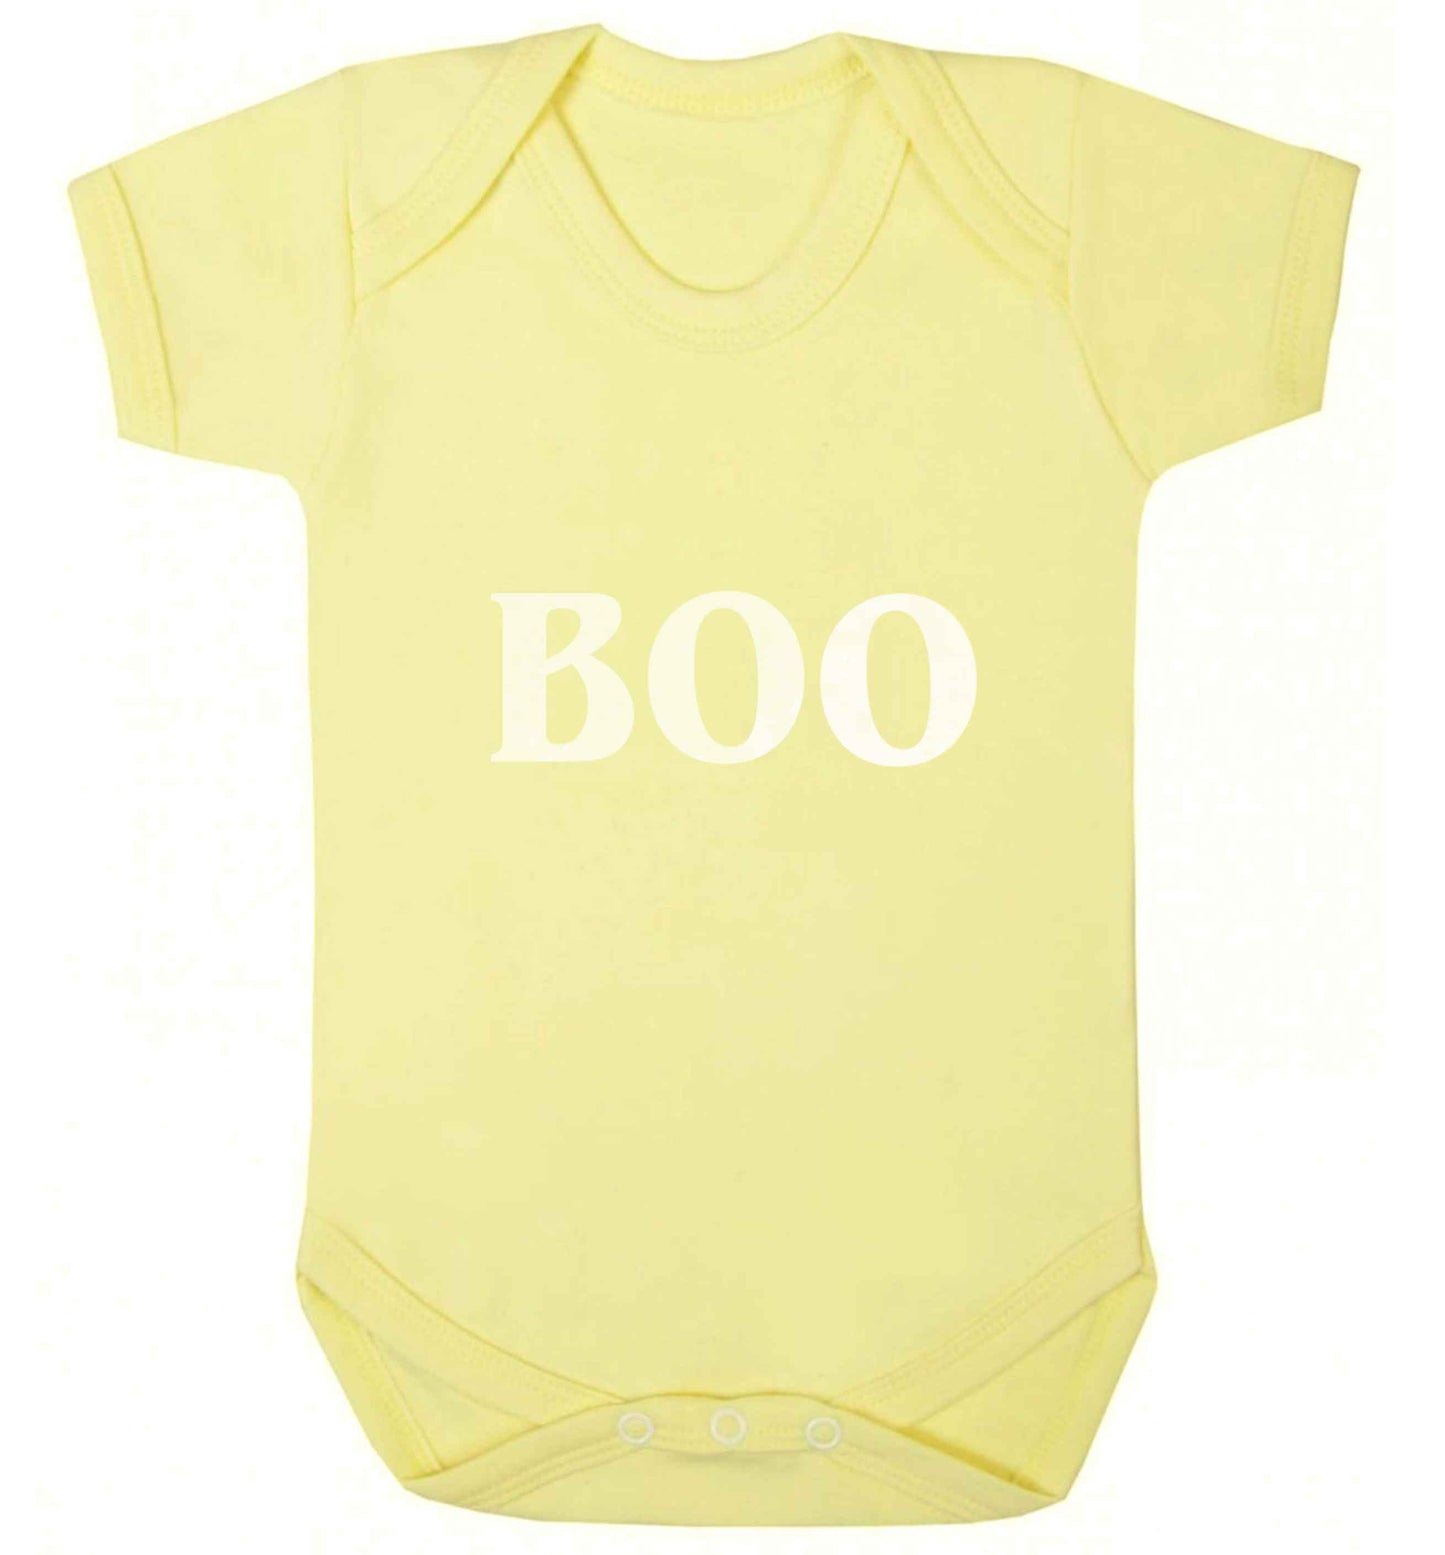 Boo baby vest pale yellow 18-24 months